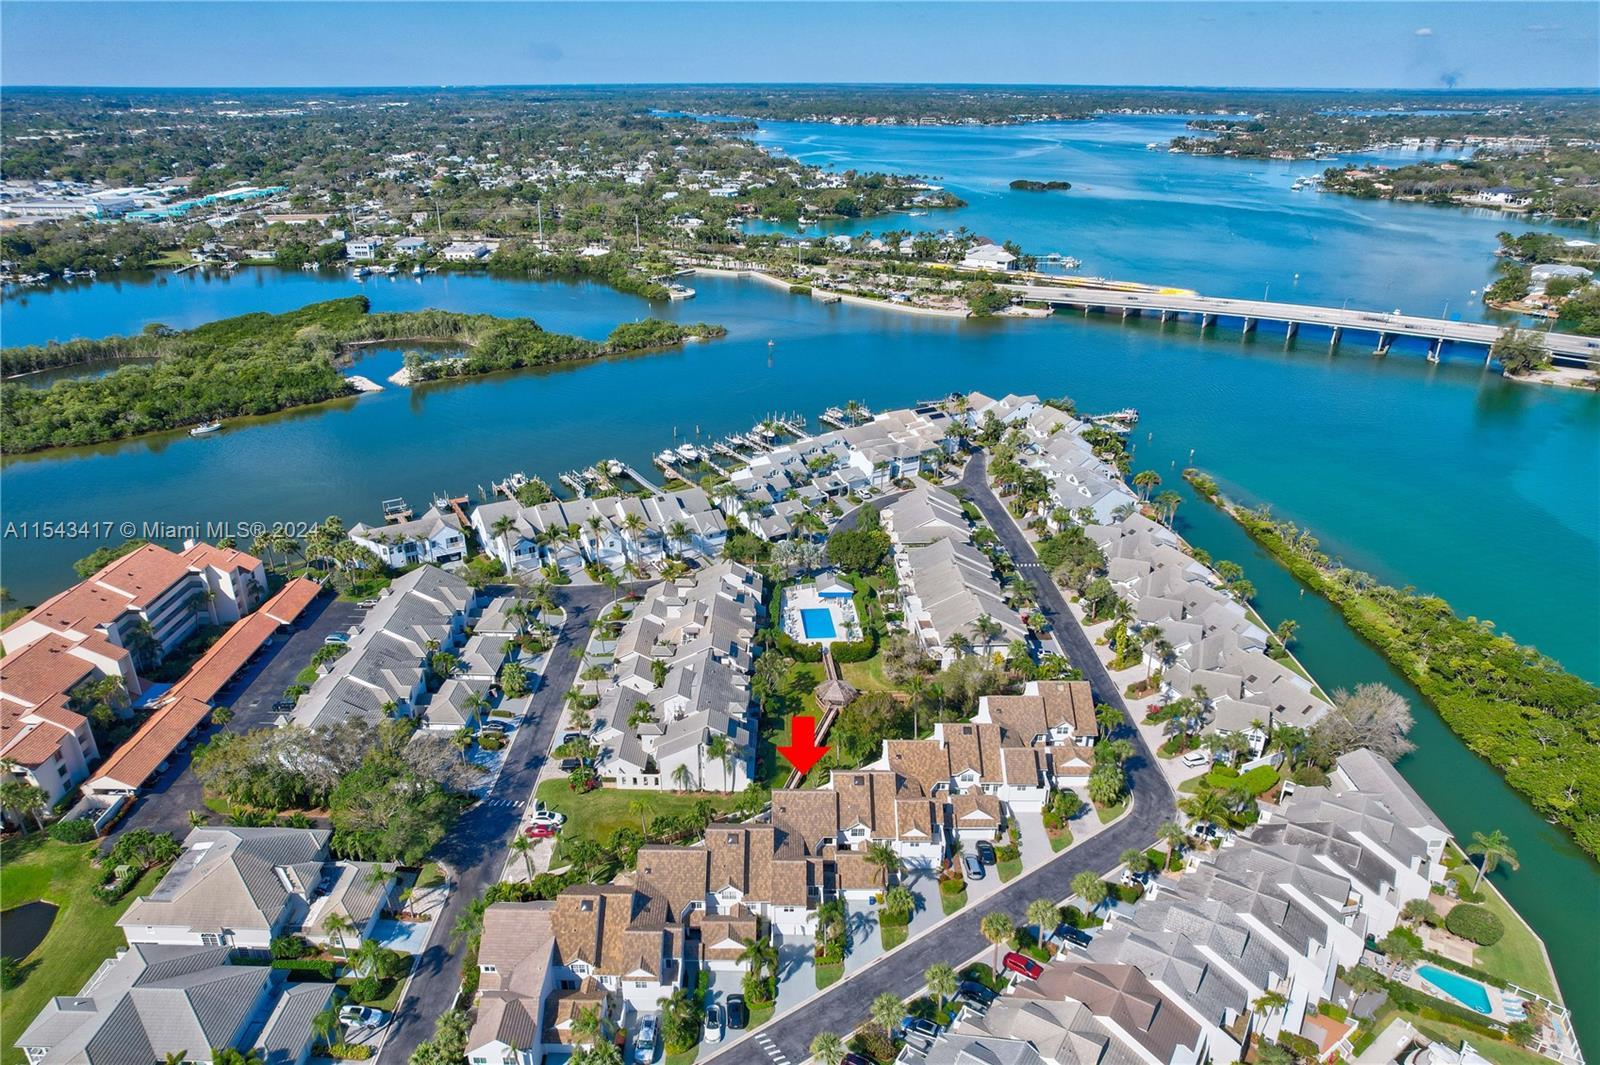 Discover your sanctuary in the Inlet District of Jupiter at Jupiter Harbour, where this exquisite 3B